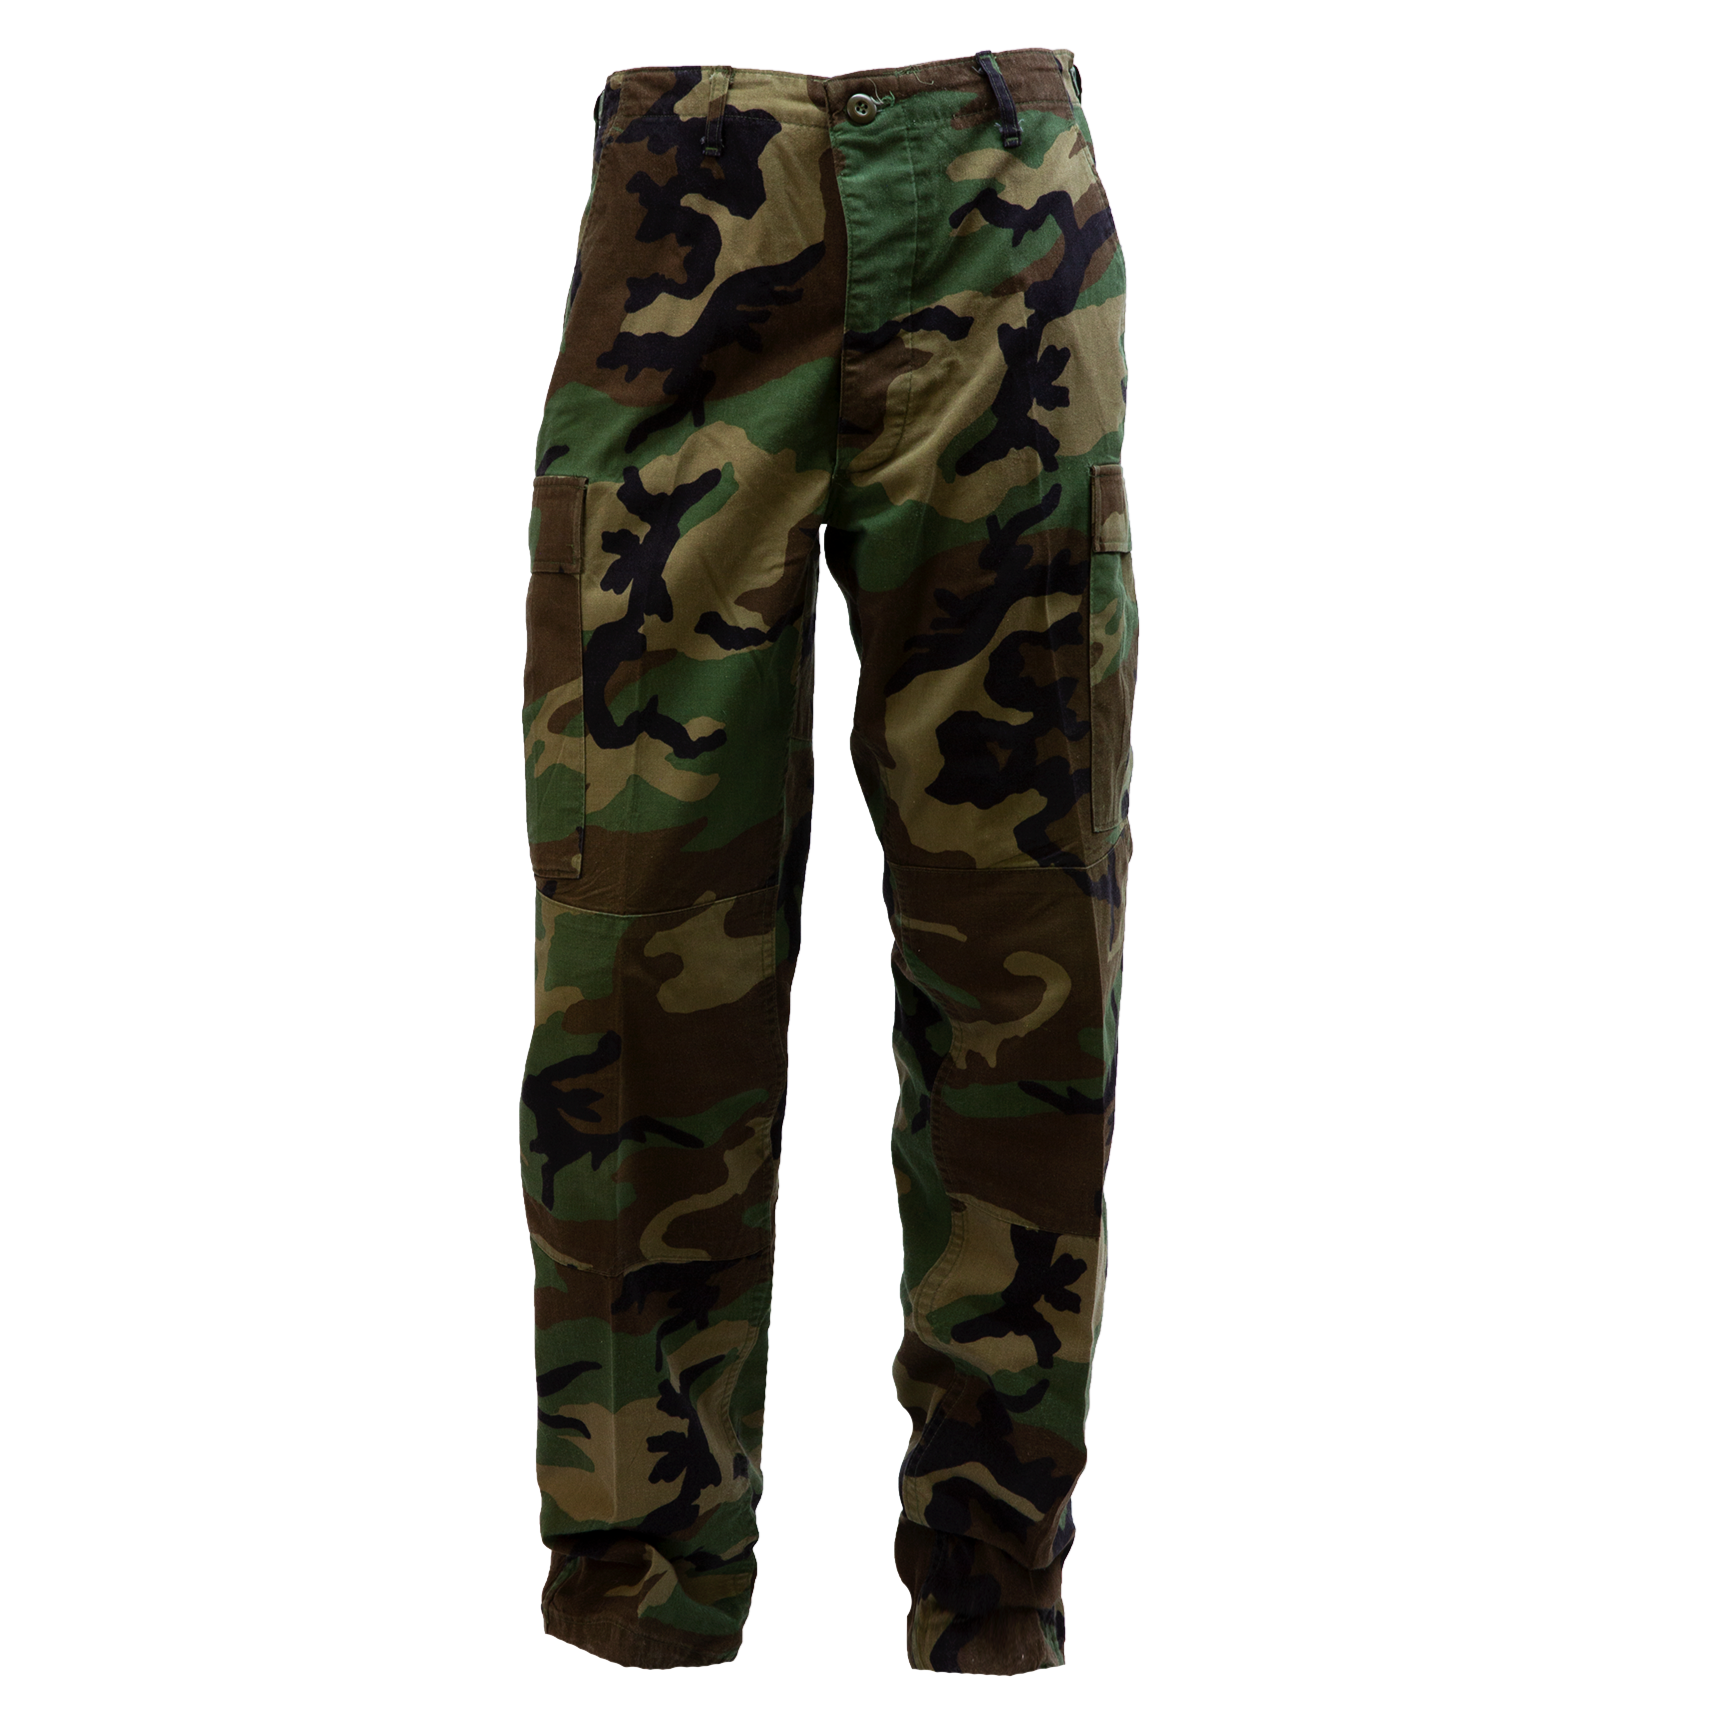 BDU Woodland Camo Trousers U.S. Military Issue Green Camouflage Pants ...